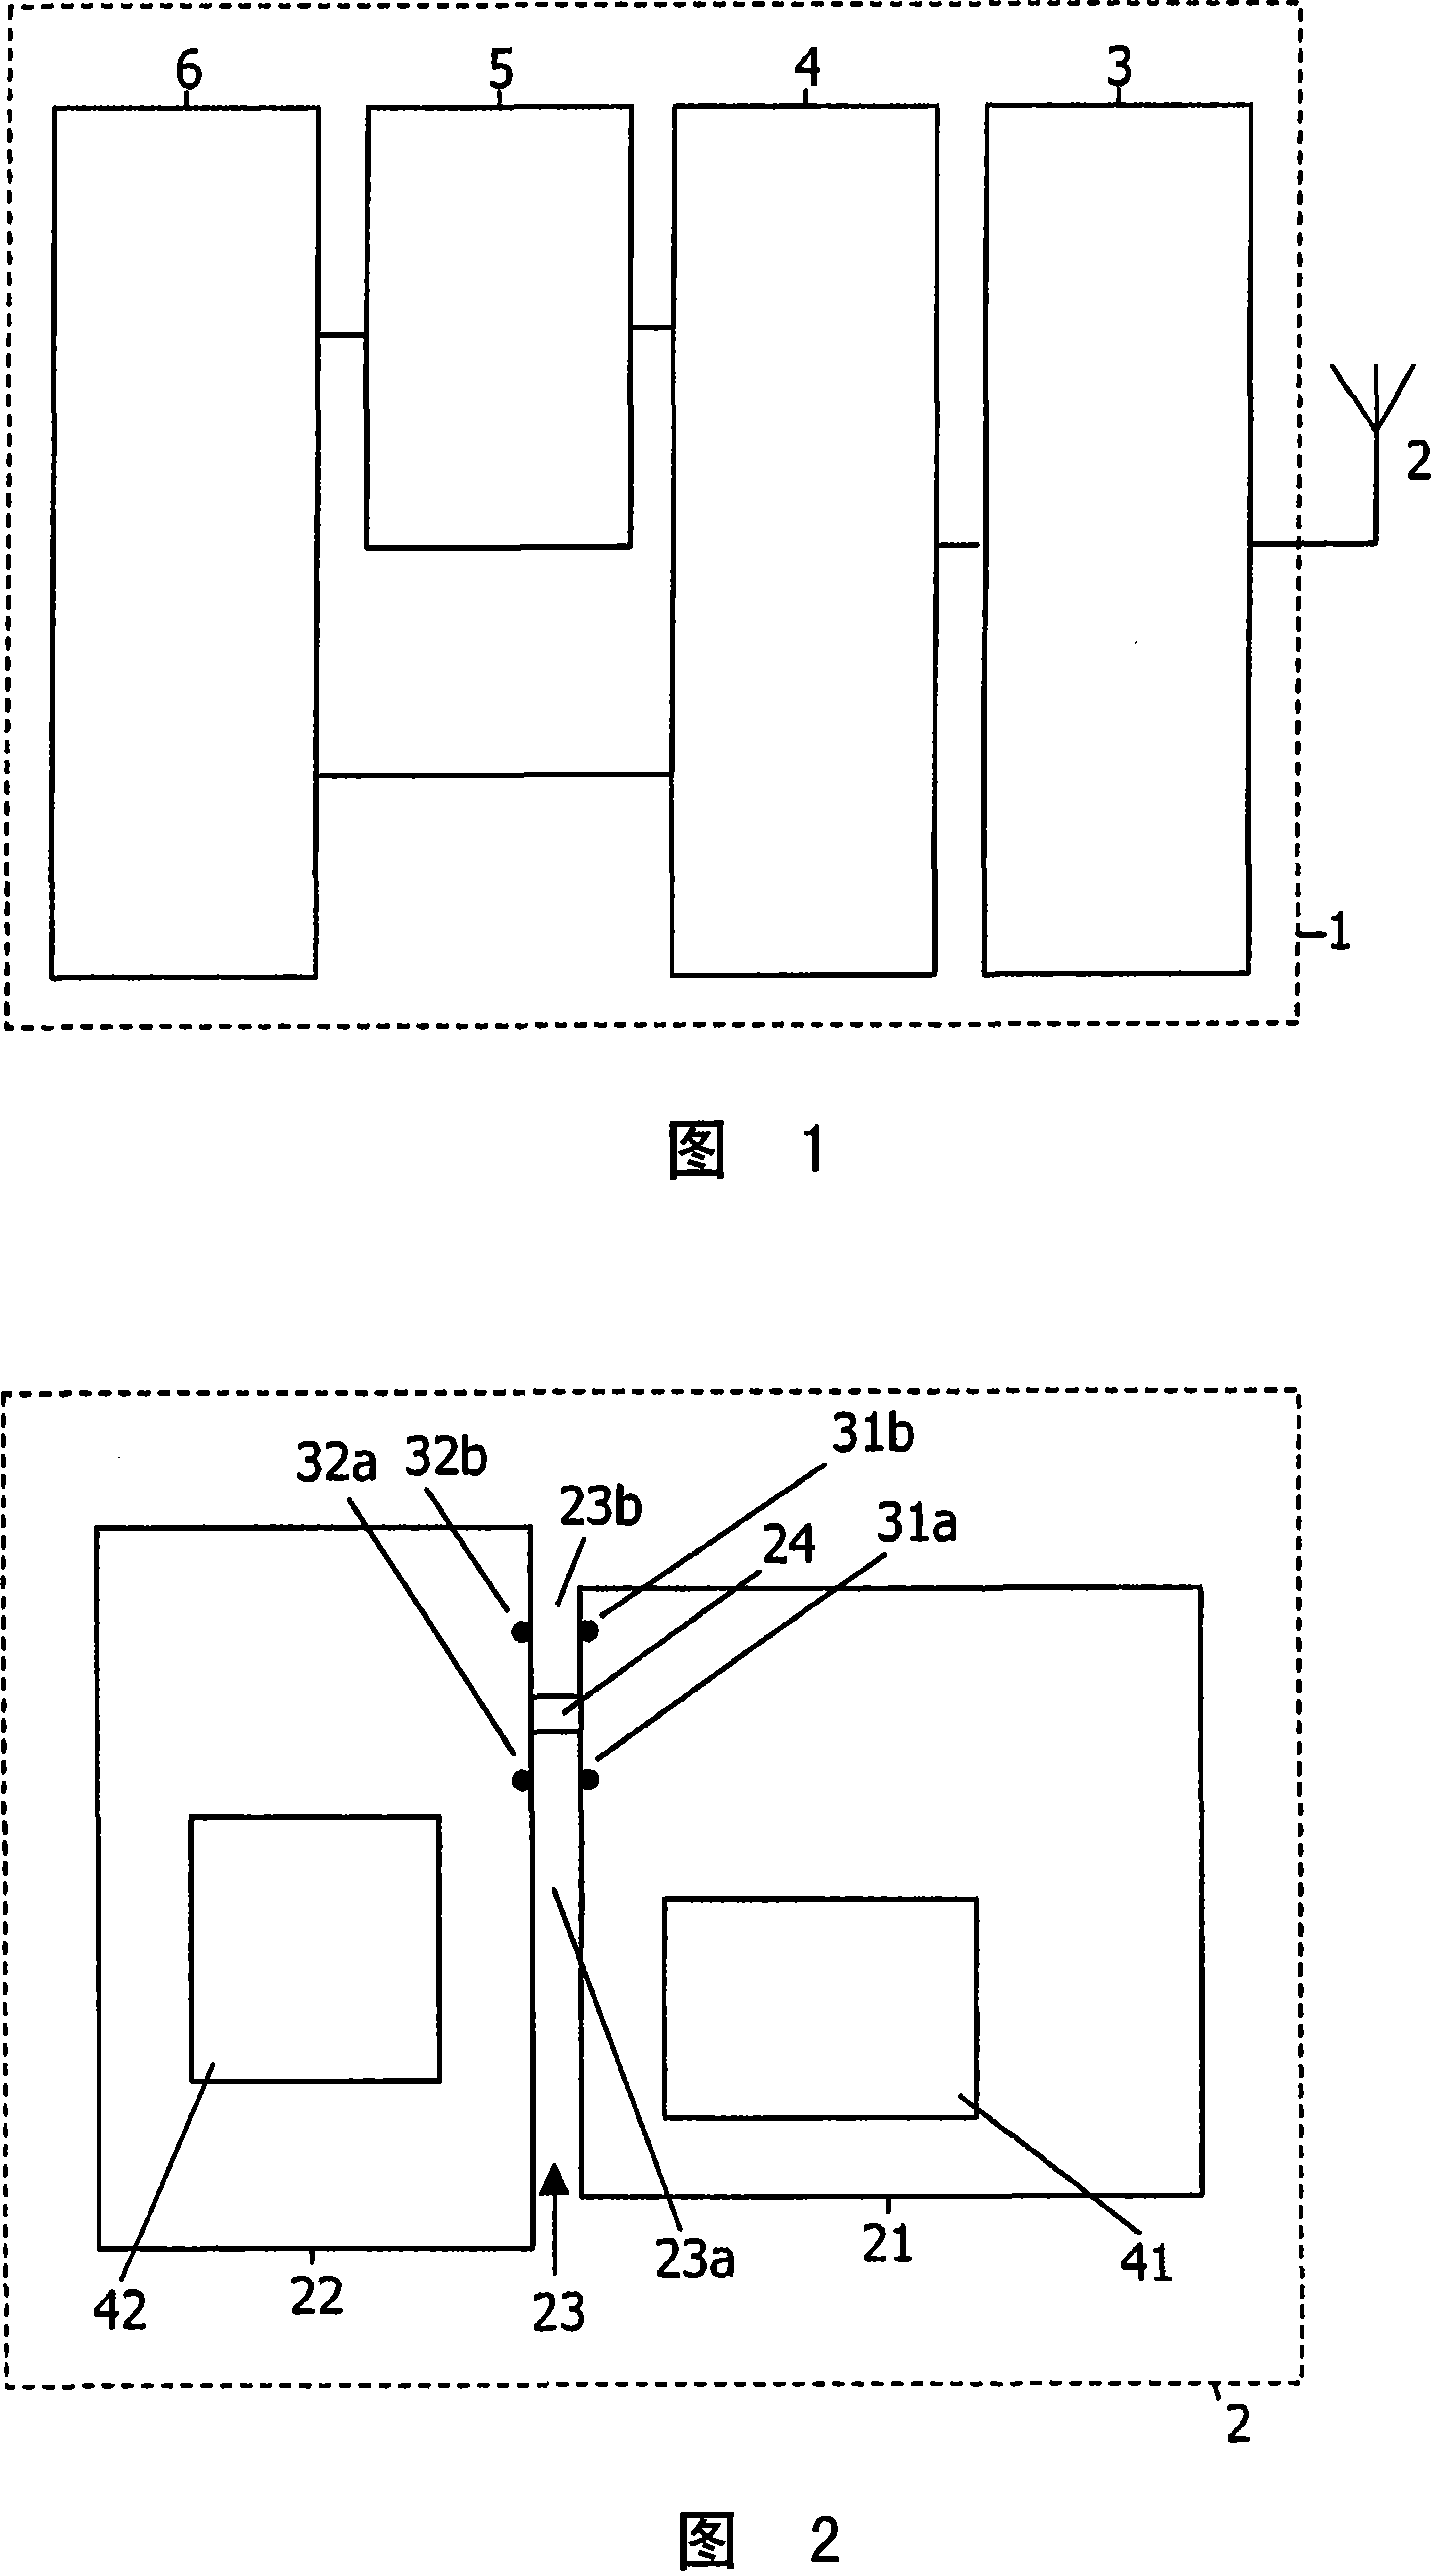 Antenna having conductive planes connected by a conductive bridge